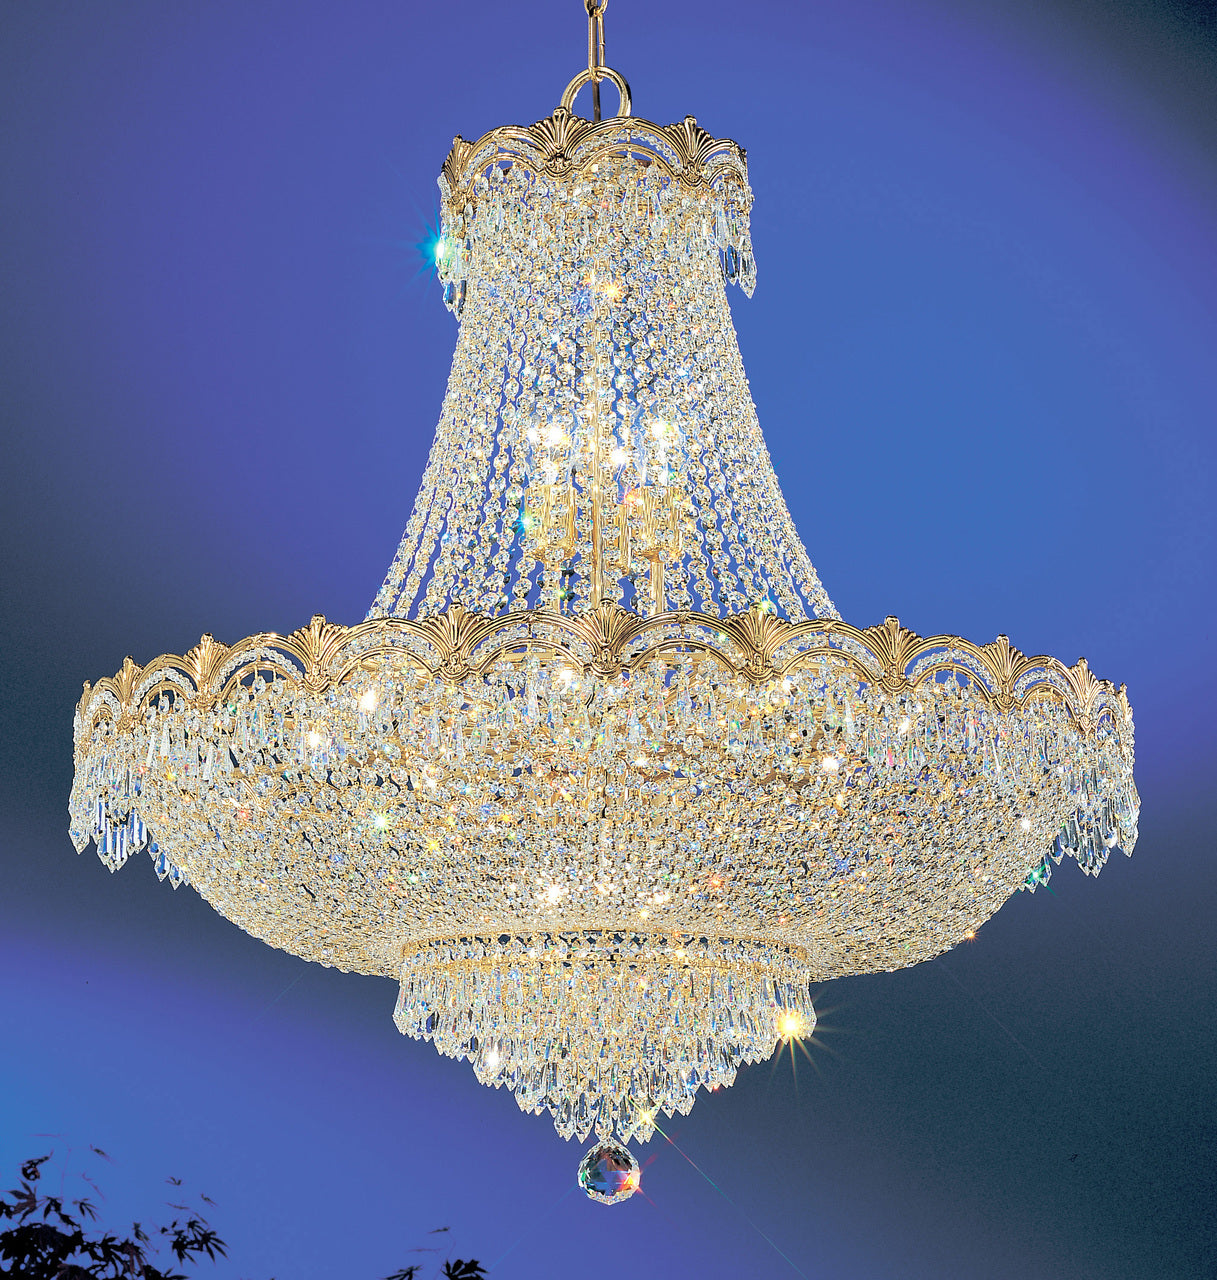 Classic Lighting 1858 G SGT Regency II Crystal Chandelier in 24k Gold (Imported from Spain)